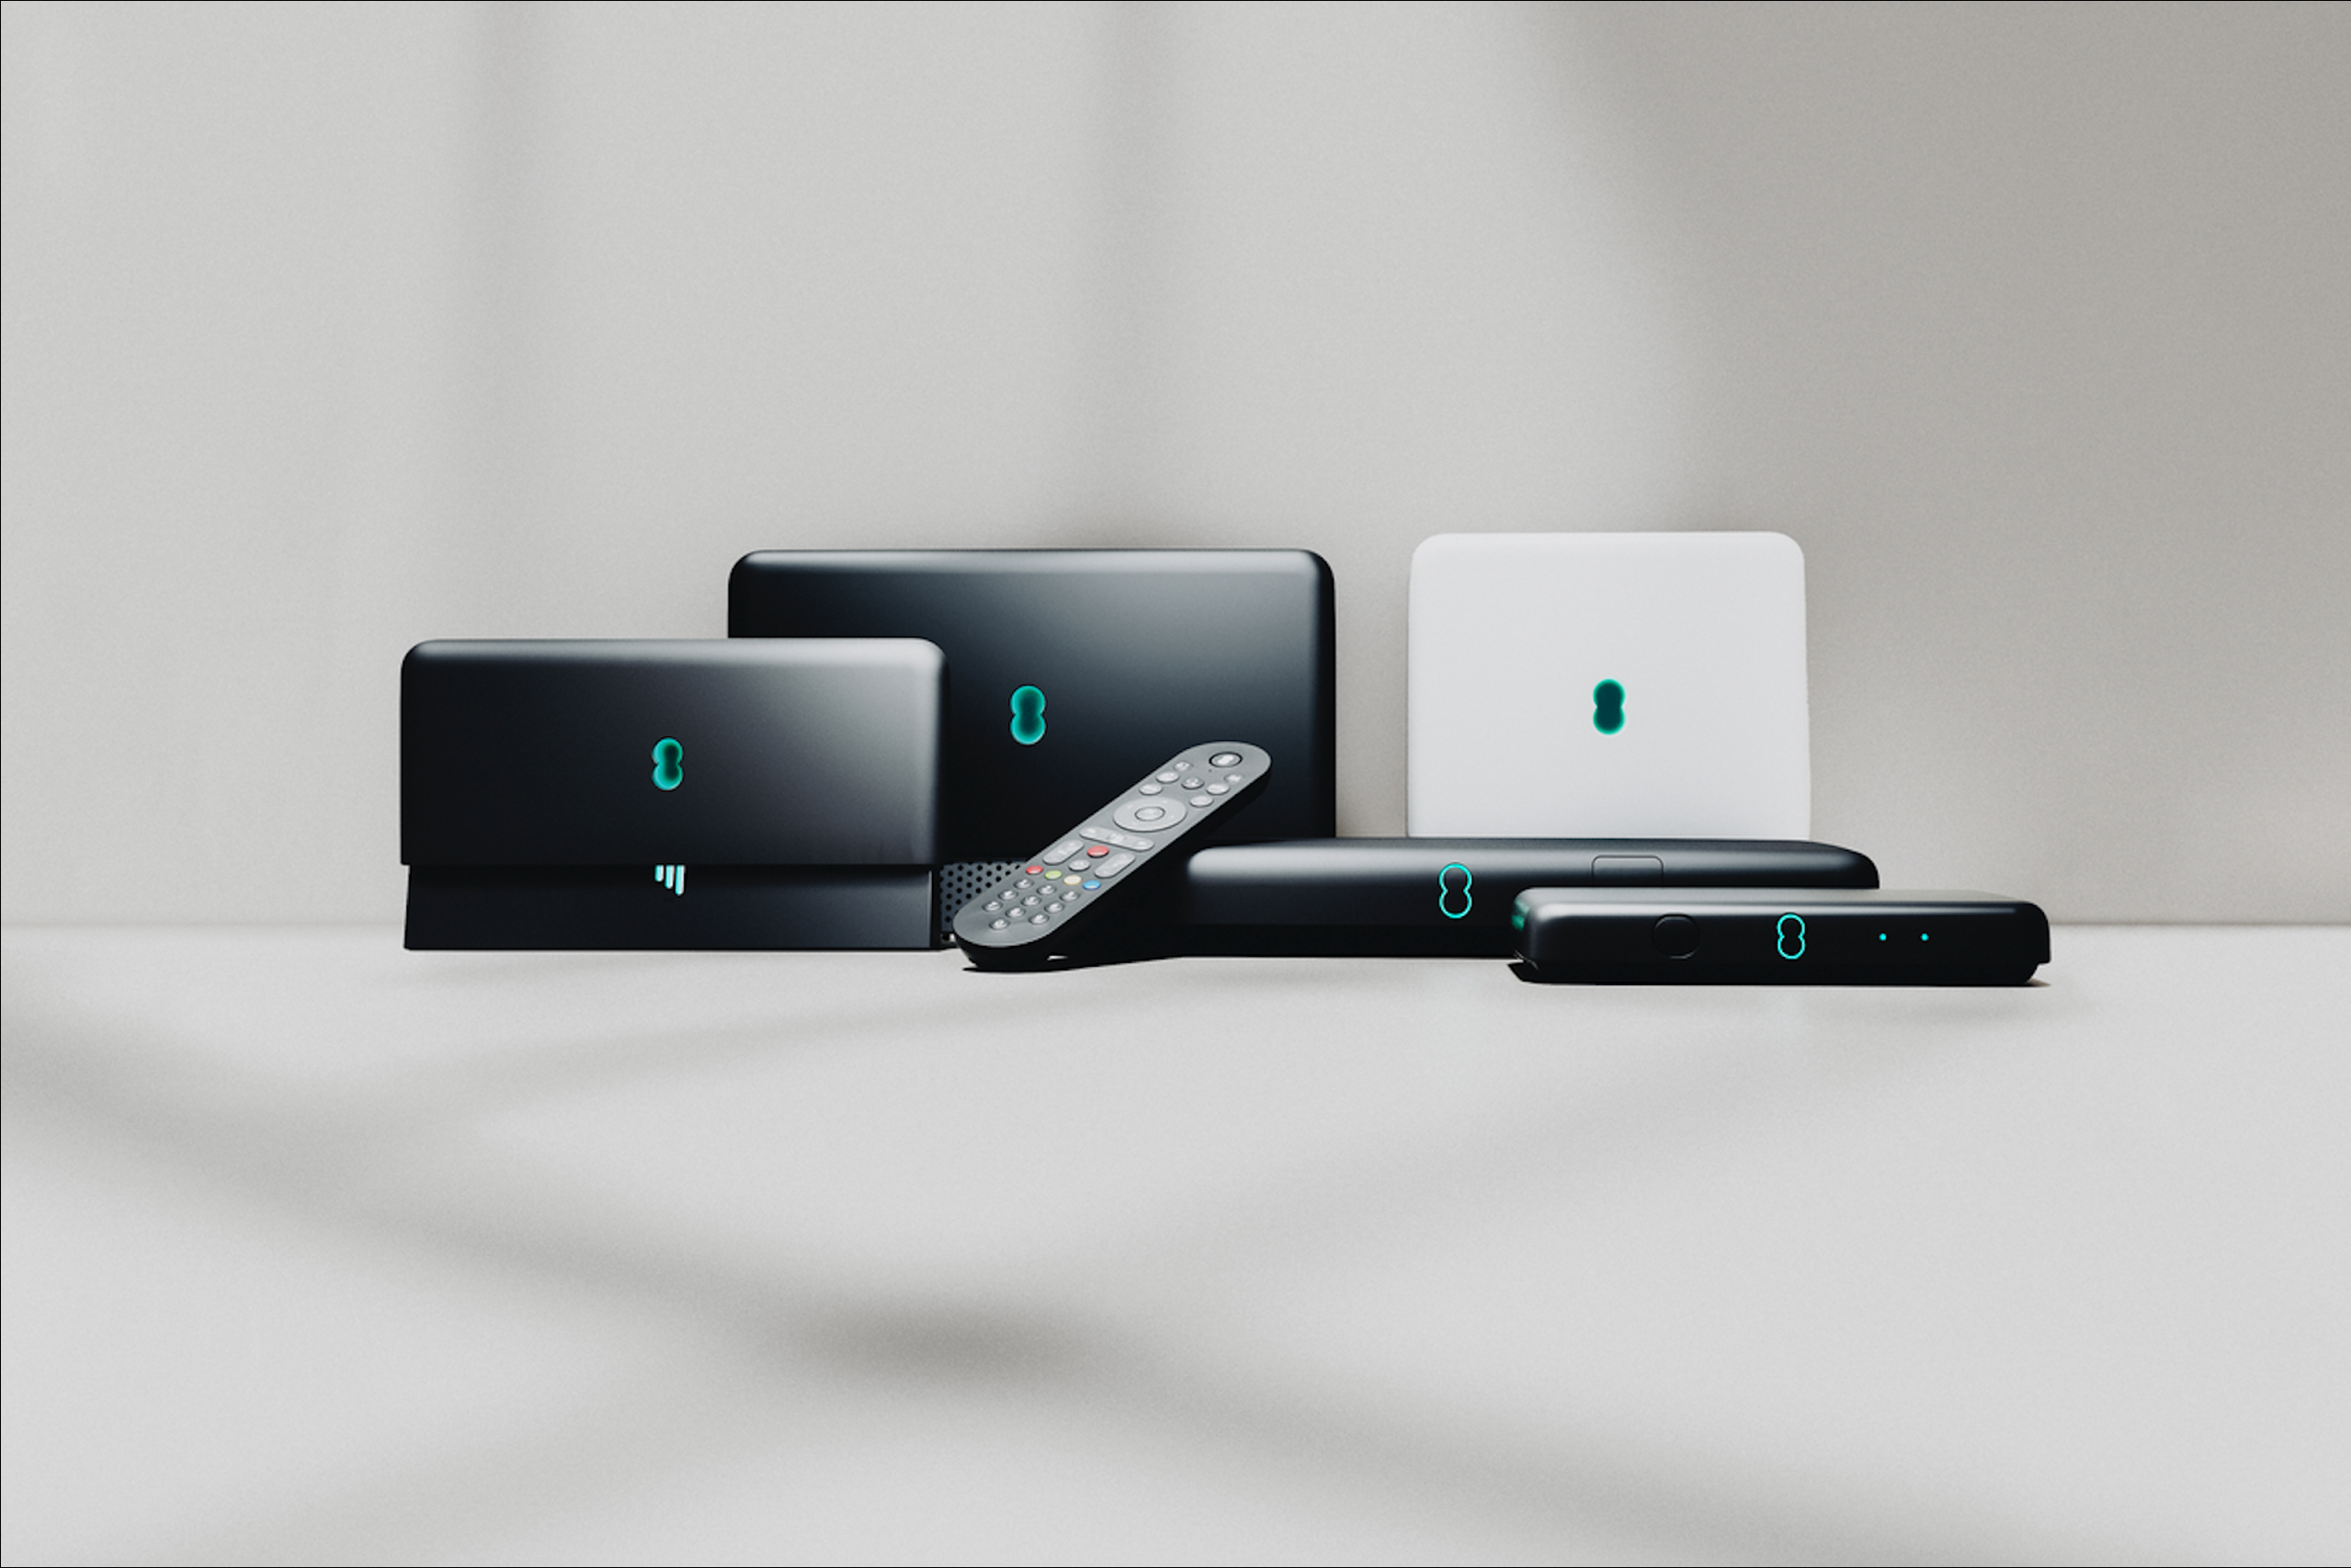 EE full device lineup - PR image